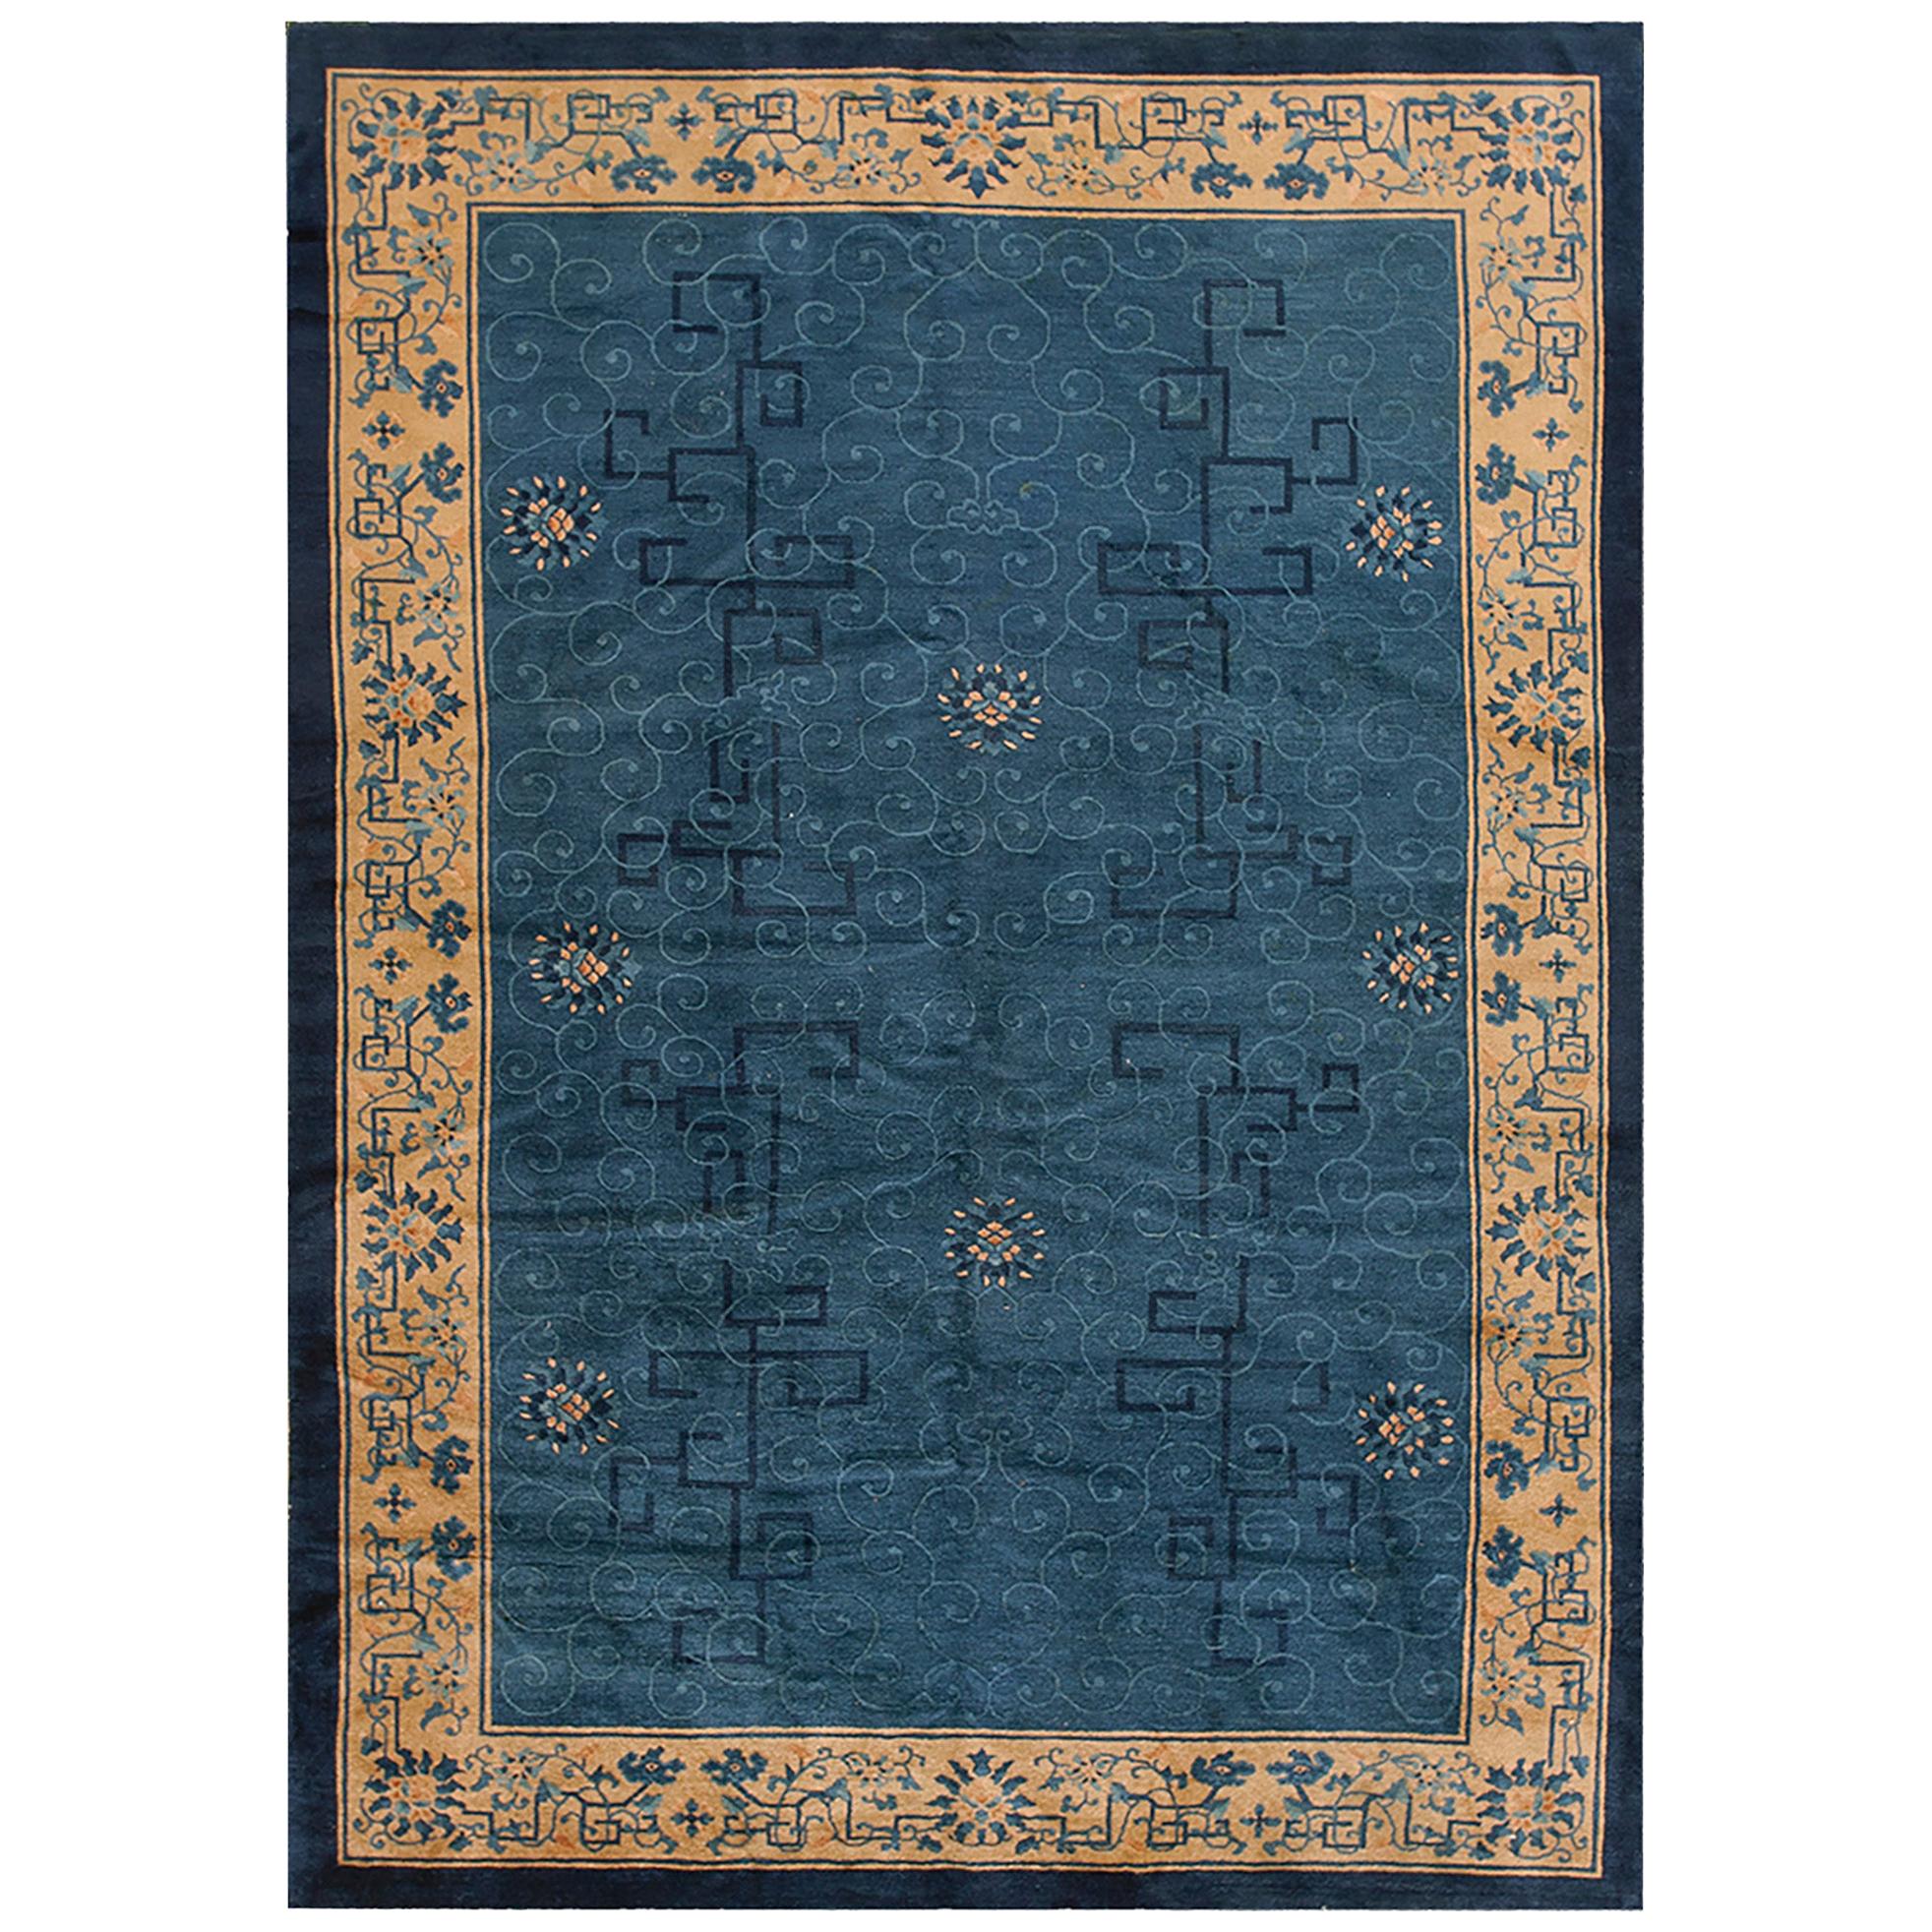 Early 20th Century Chinese Peking Carpet ( 6'2" x 9'9" - 188 x 297 )  For Sale